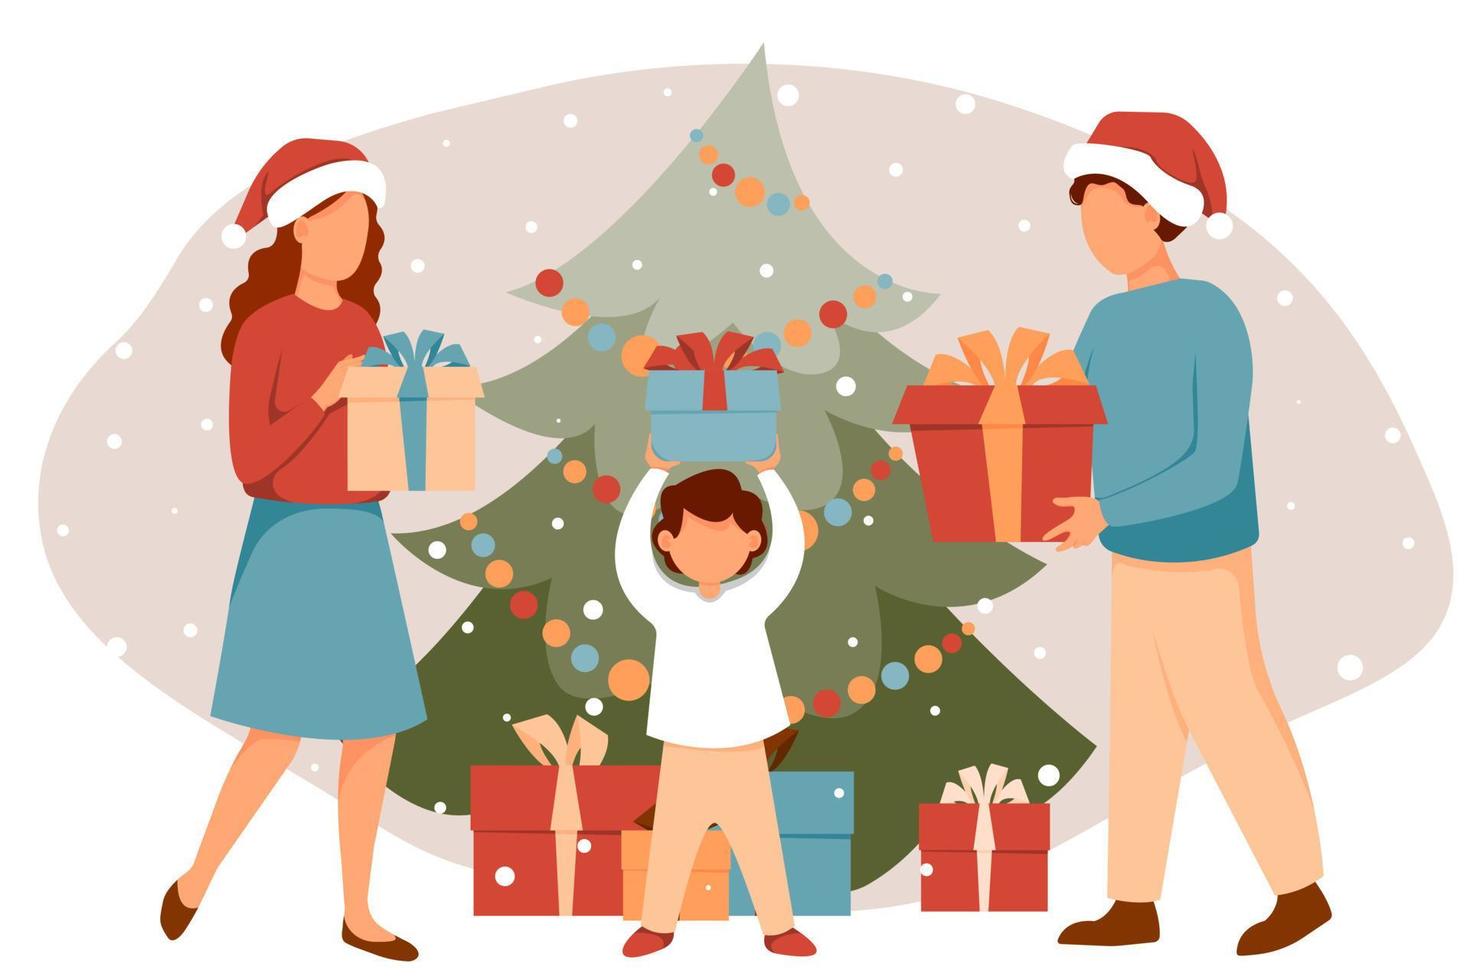 Family giving presents by Christmas tree. Vector illustration in flat style.